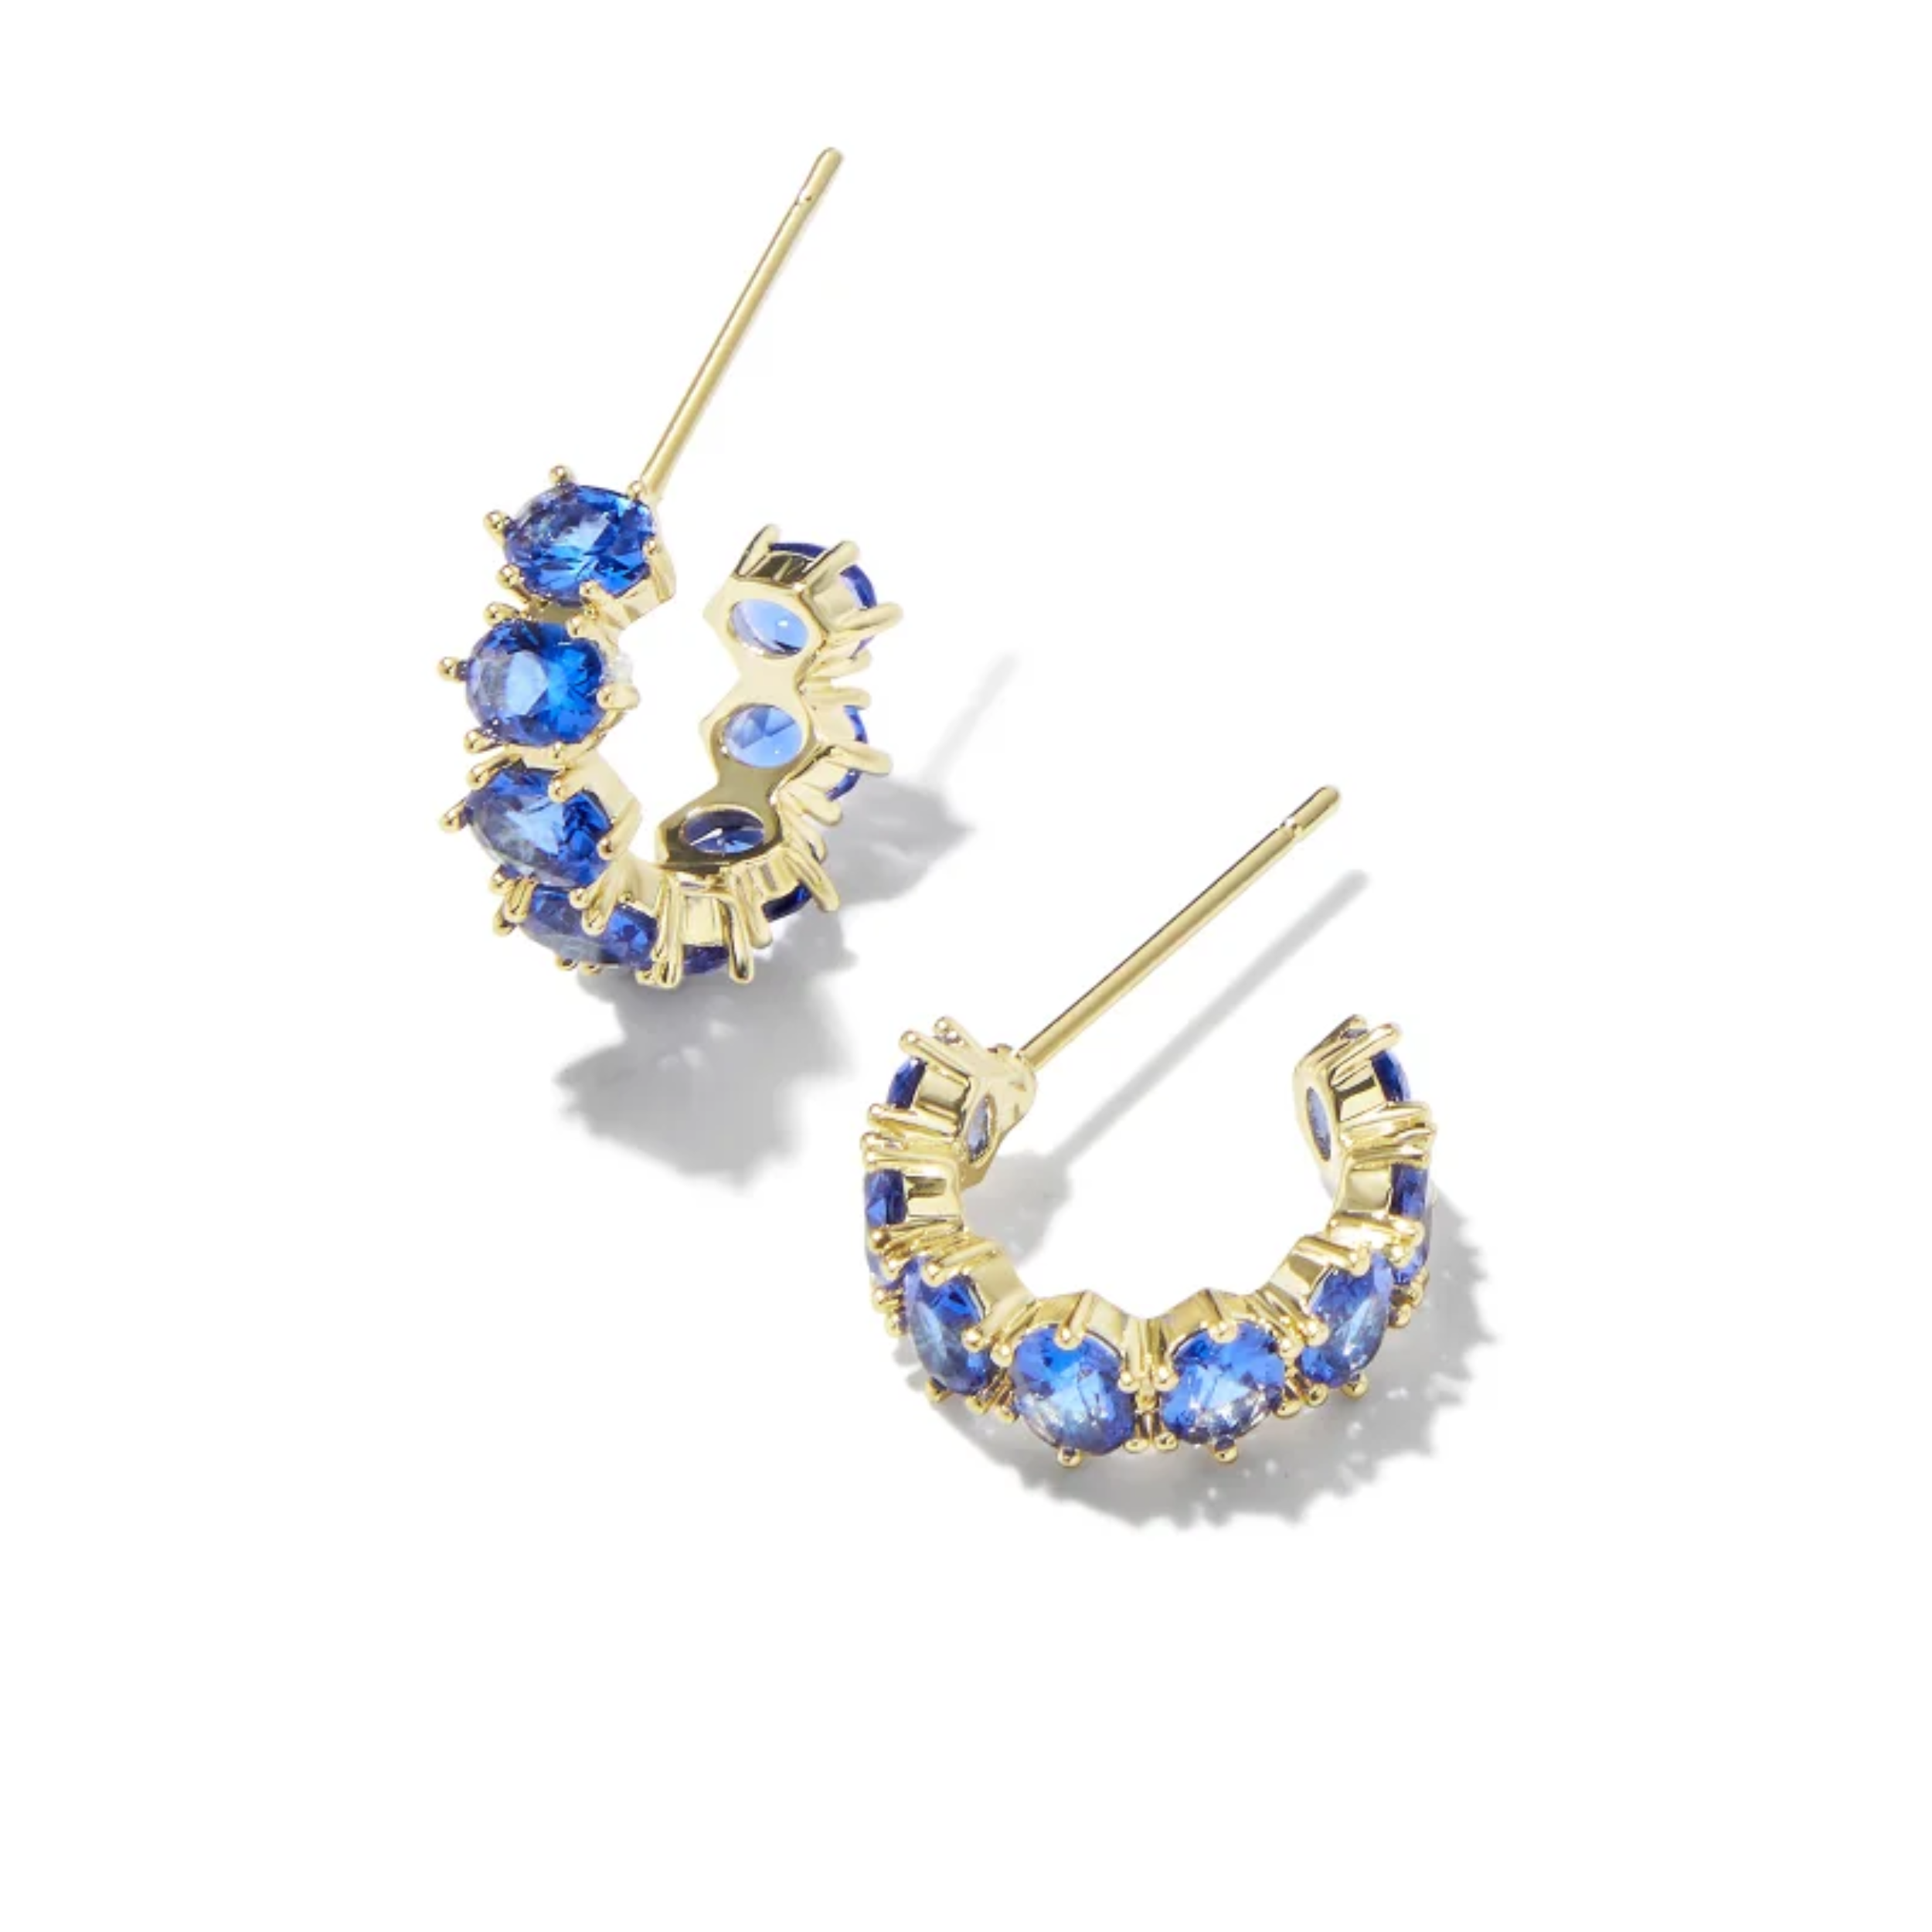 These Cailin Gold Crystal Huggie earrings in Blue Crystal by Kendra Scott are pictured on a white background.